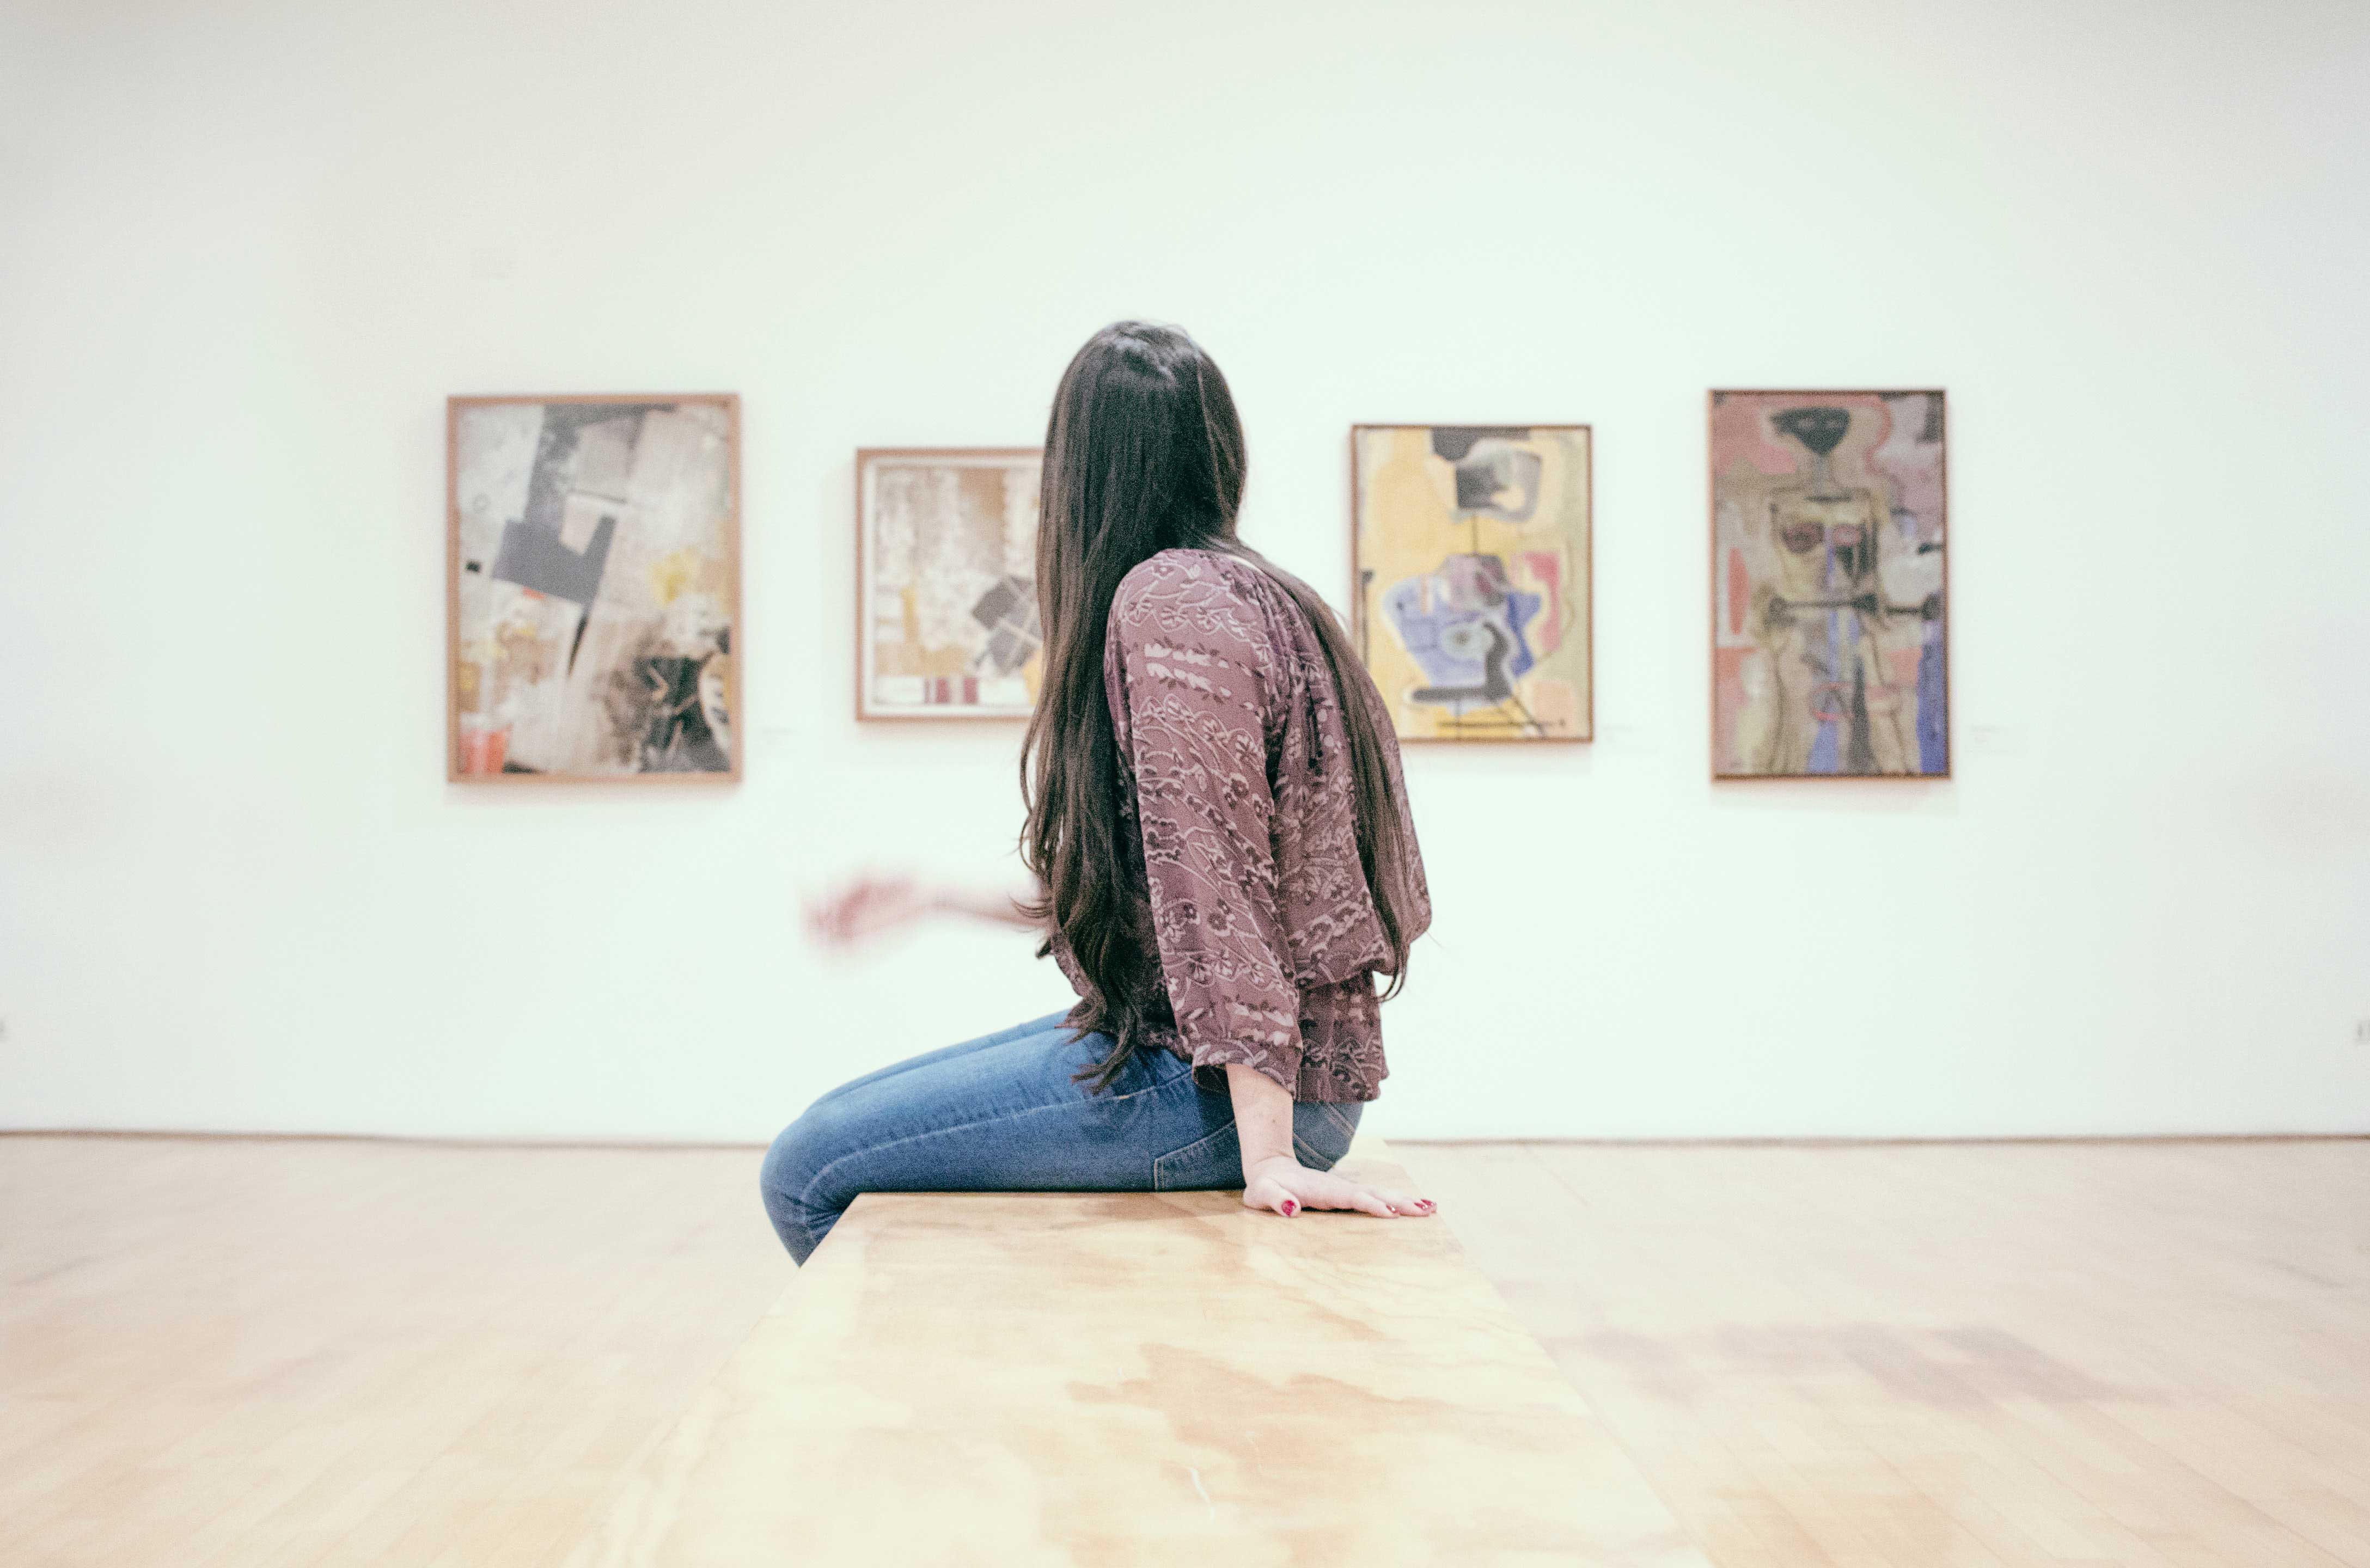 An artlover looking at paintings in an exhibition space